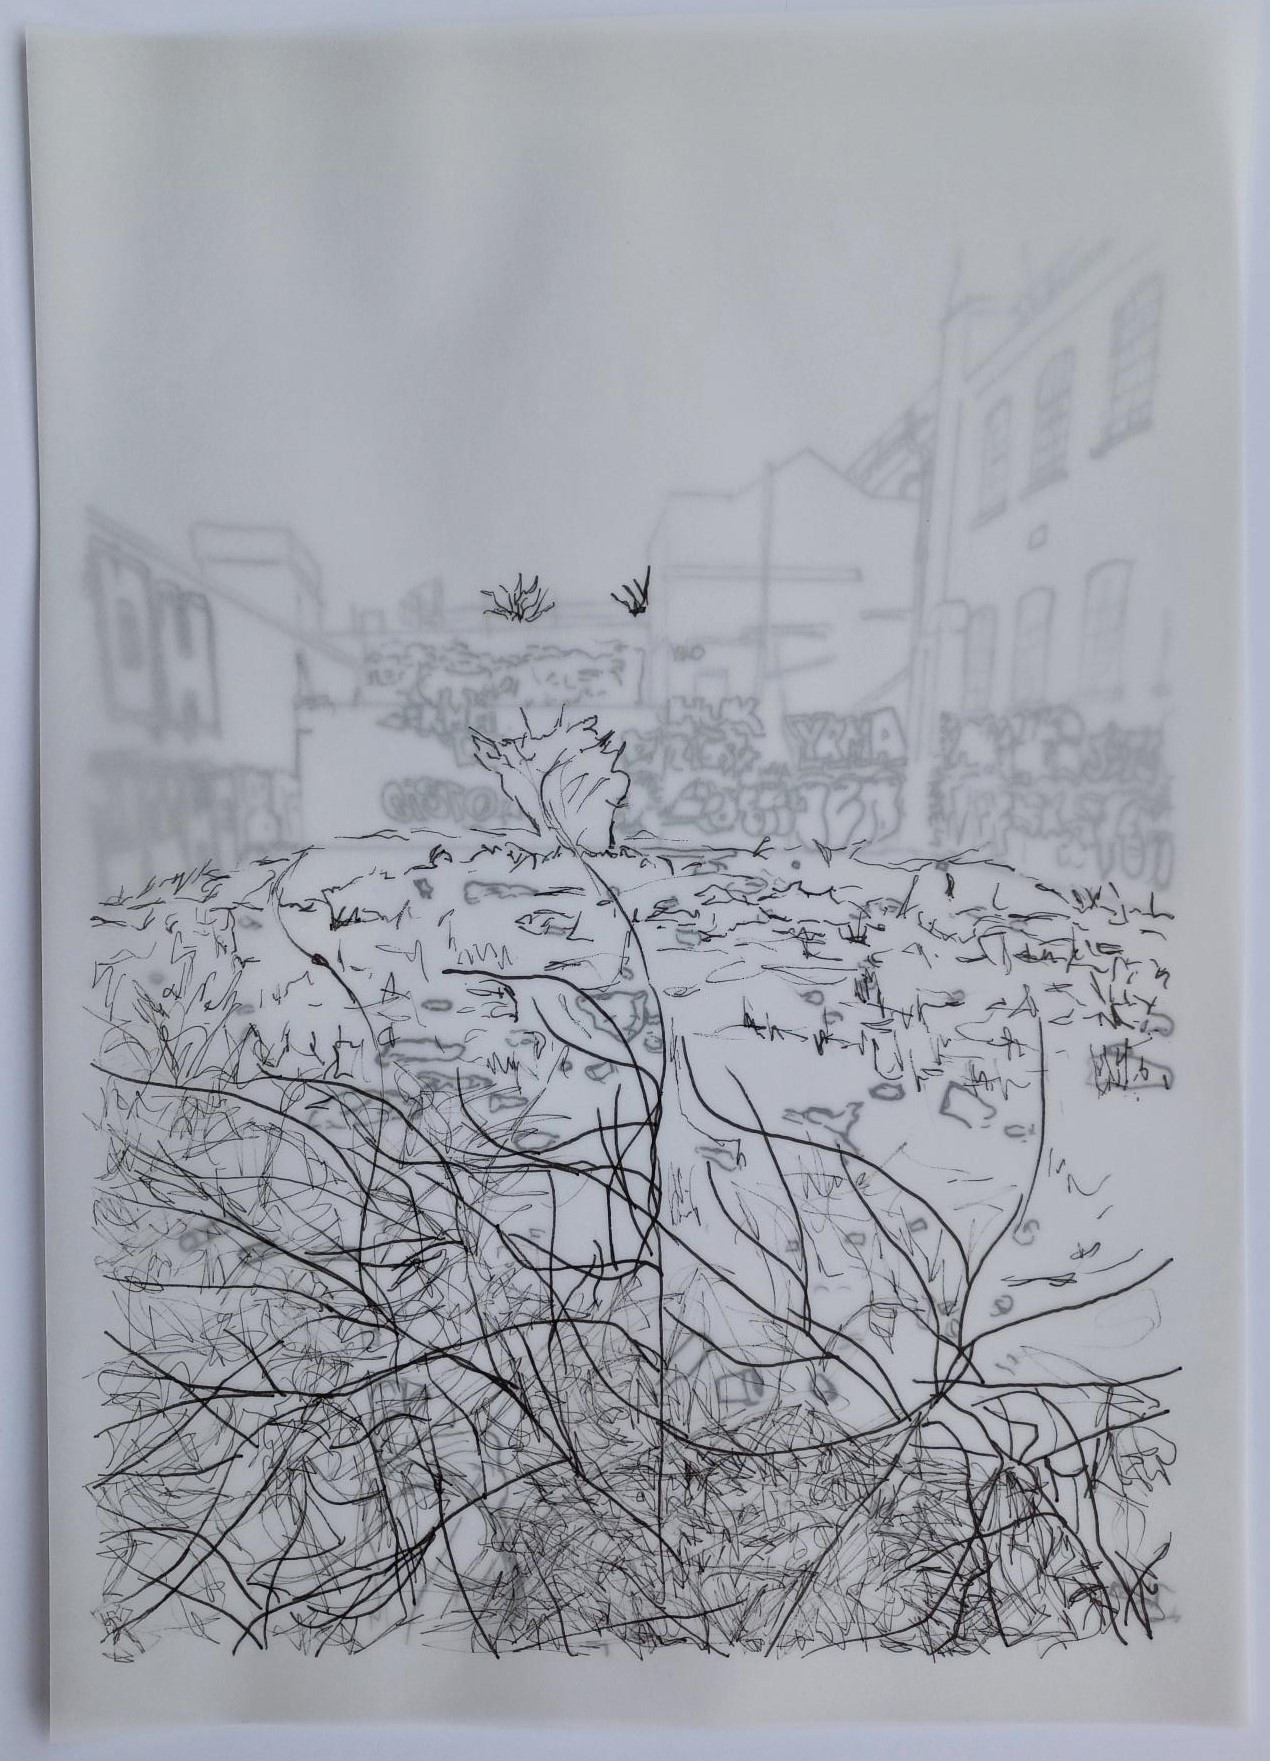 Drawing 4 from *Untitled*, a series of 4 drawings made using archival pens on tracing paper, 21 x 30cm